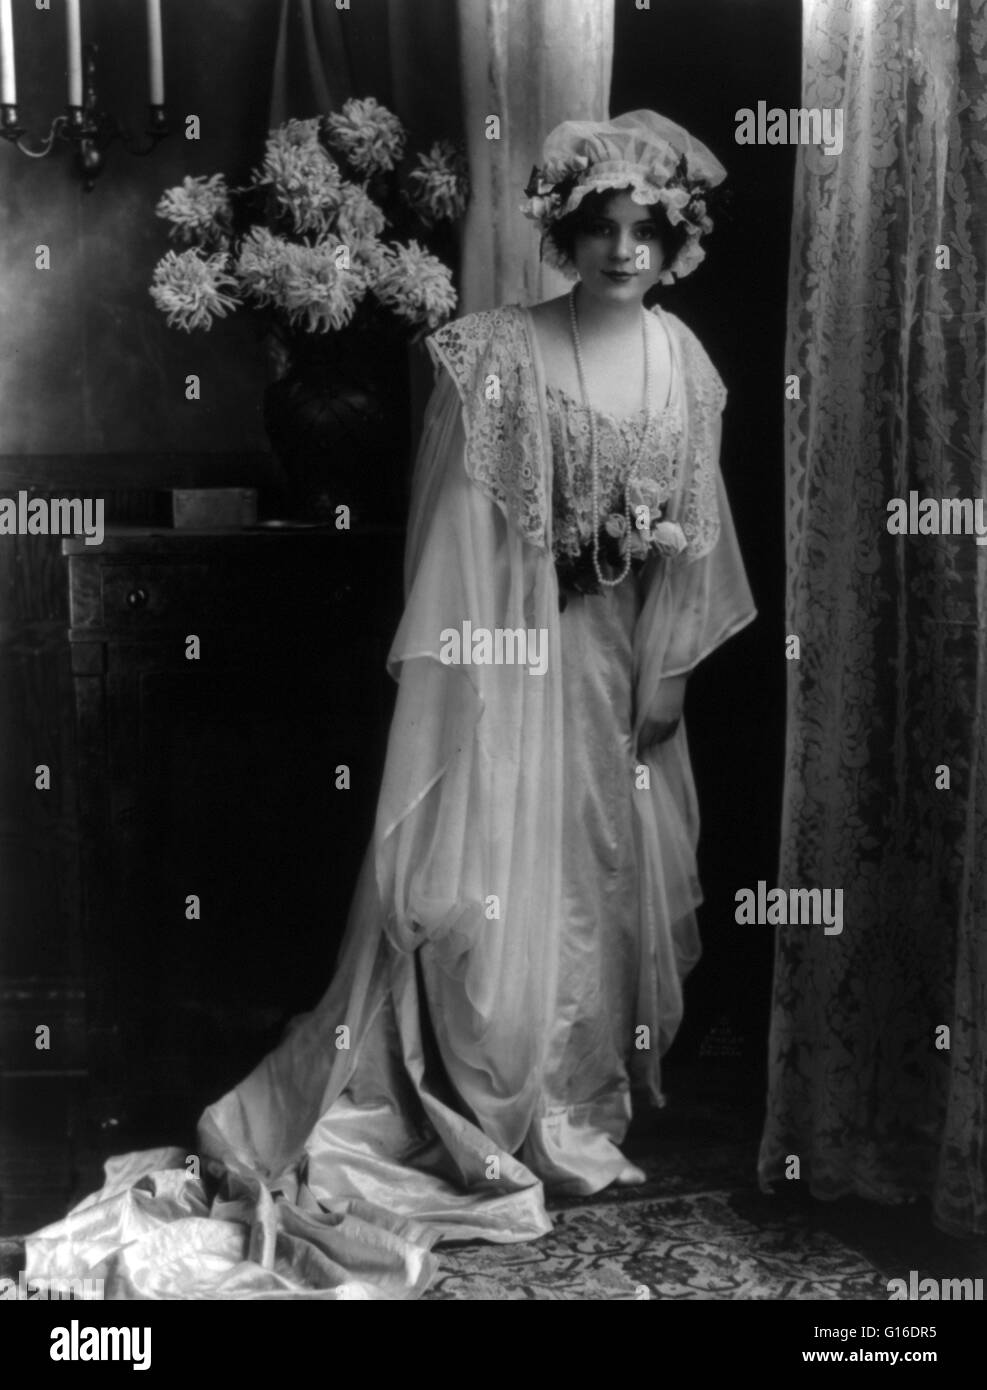 Young woman posed in lace gown and cap. A peignoir is a long outer garment for women which is frequently sheer and made of chiffon or another translucent fabric. Nightwear is clothing designed to be worn while sleeping. The style of nightwear worn may var Stock Photo